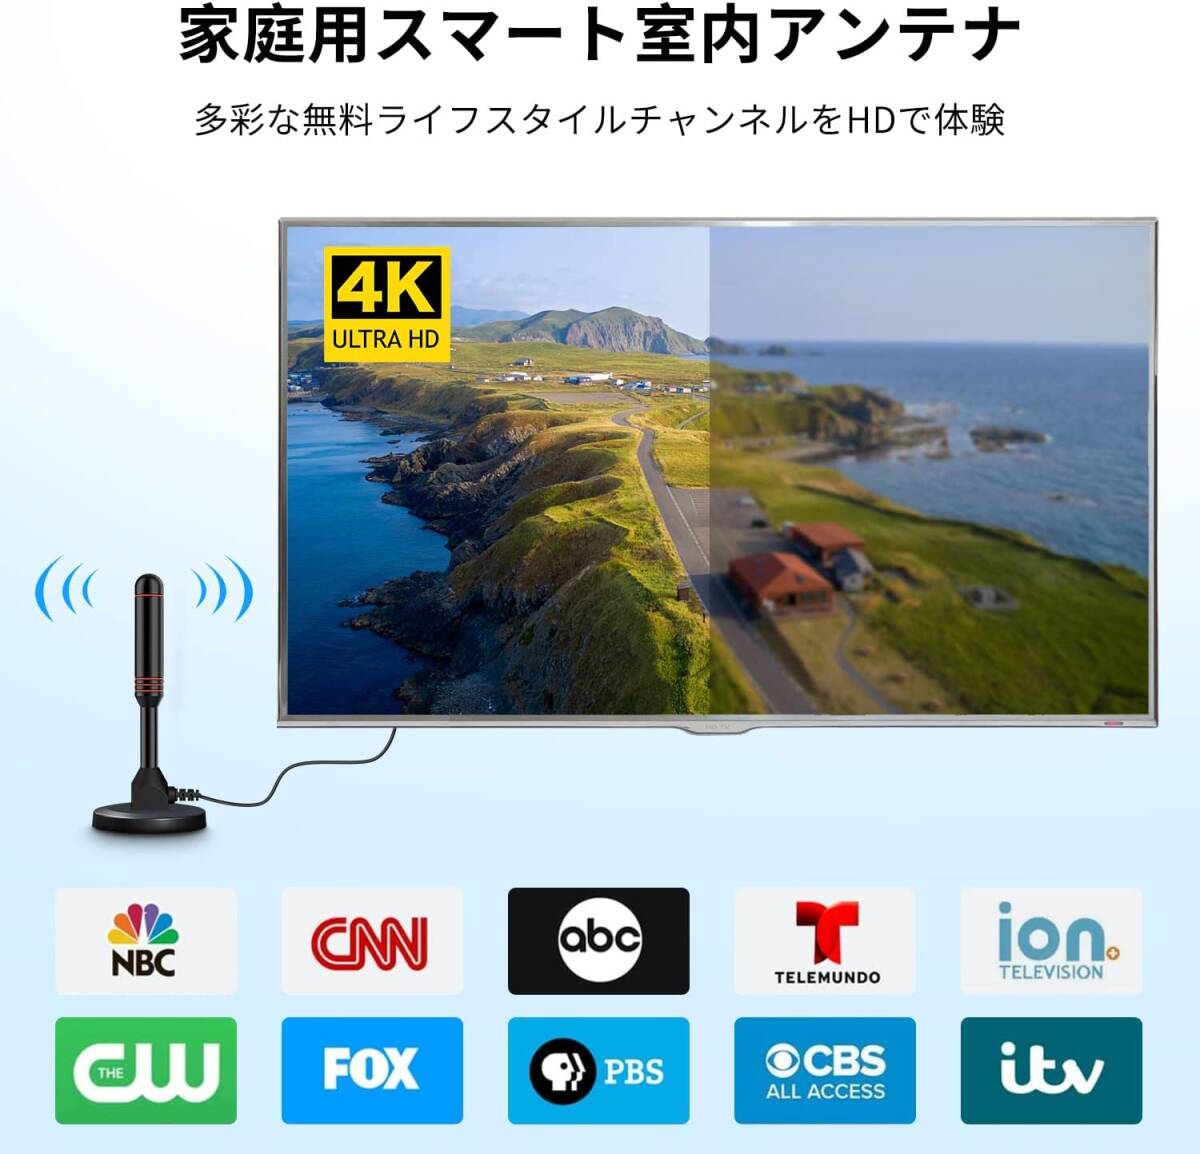  interior antenna 4K HD TV tv antenna 430KM reception range 360 times all direction reception digital booster built-in signal booster attaching all kind UHF VHF correspondence 